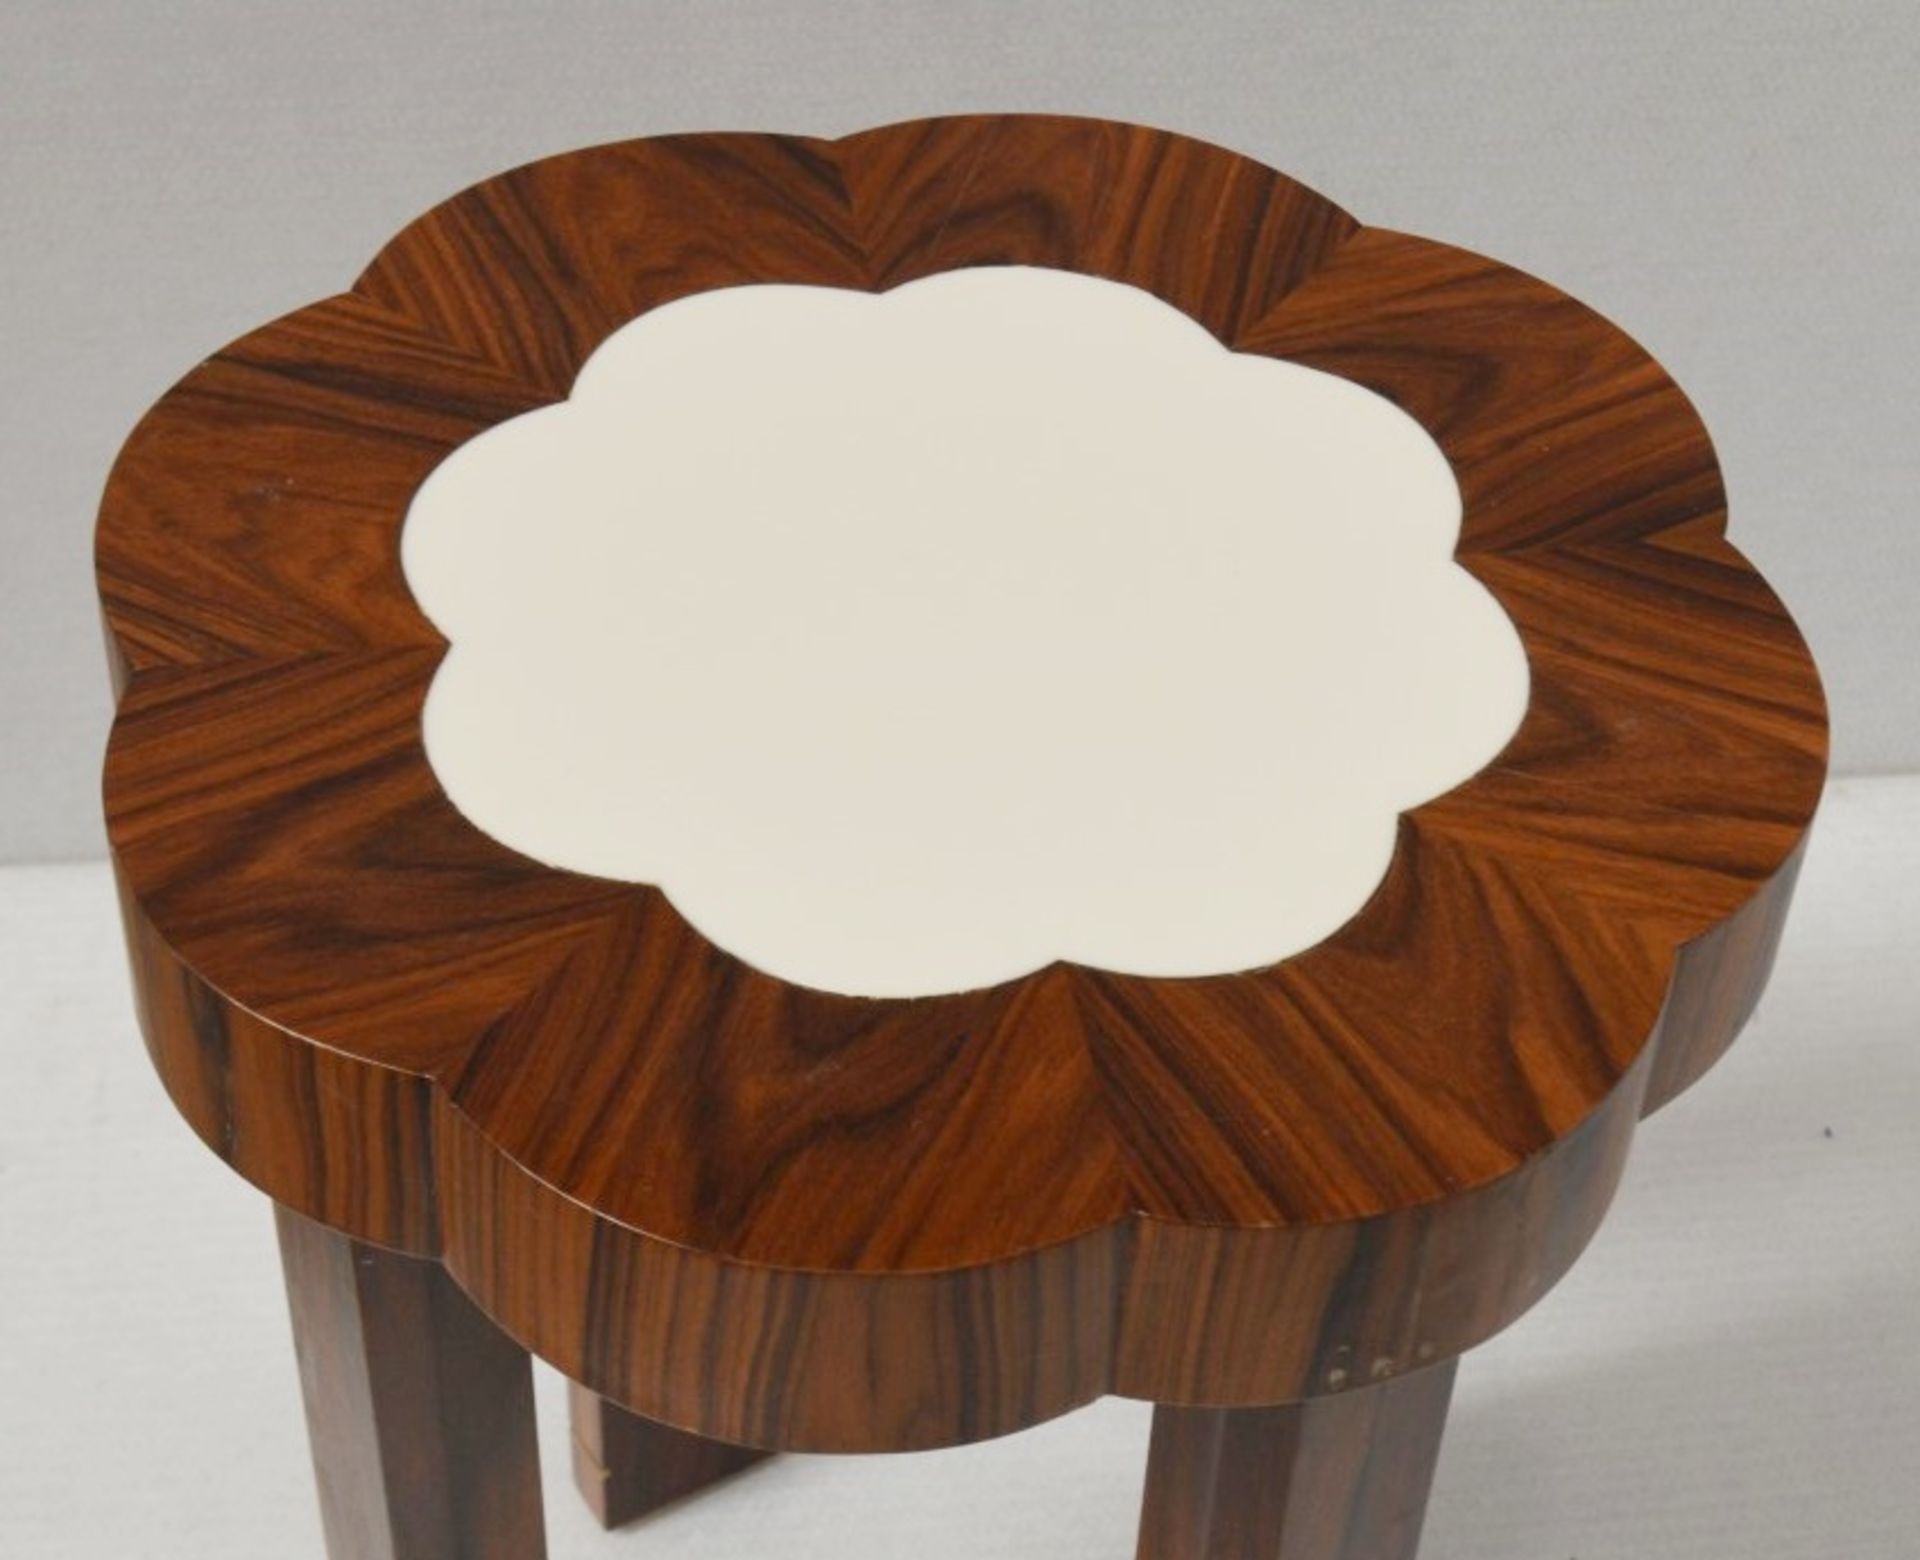 1 x Moroccan-style Solid Wood Side Table With Stone Inlay And Glass Top - Dimensions: Height - Image 3 of 3